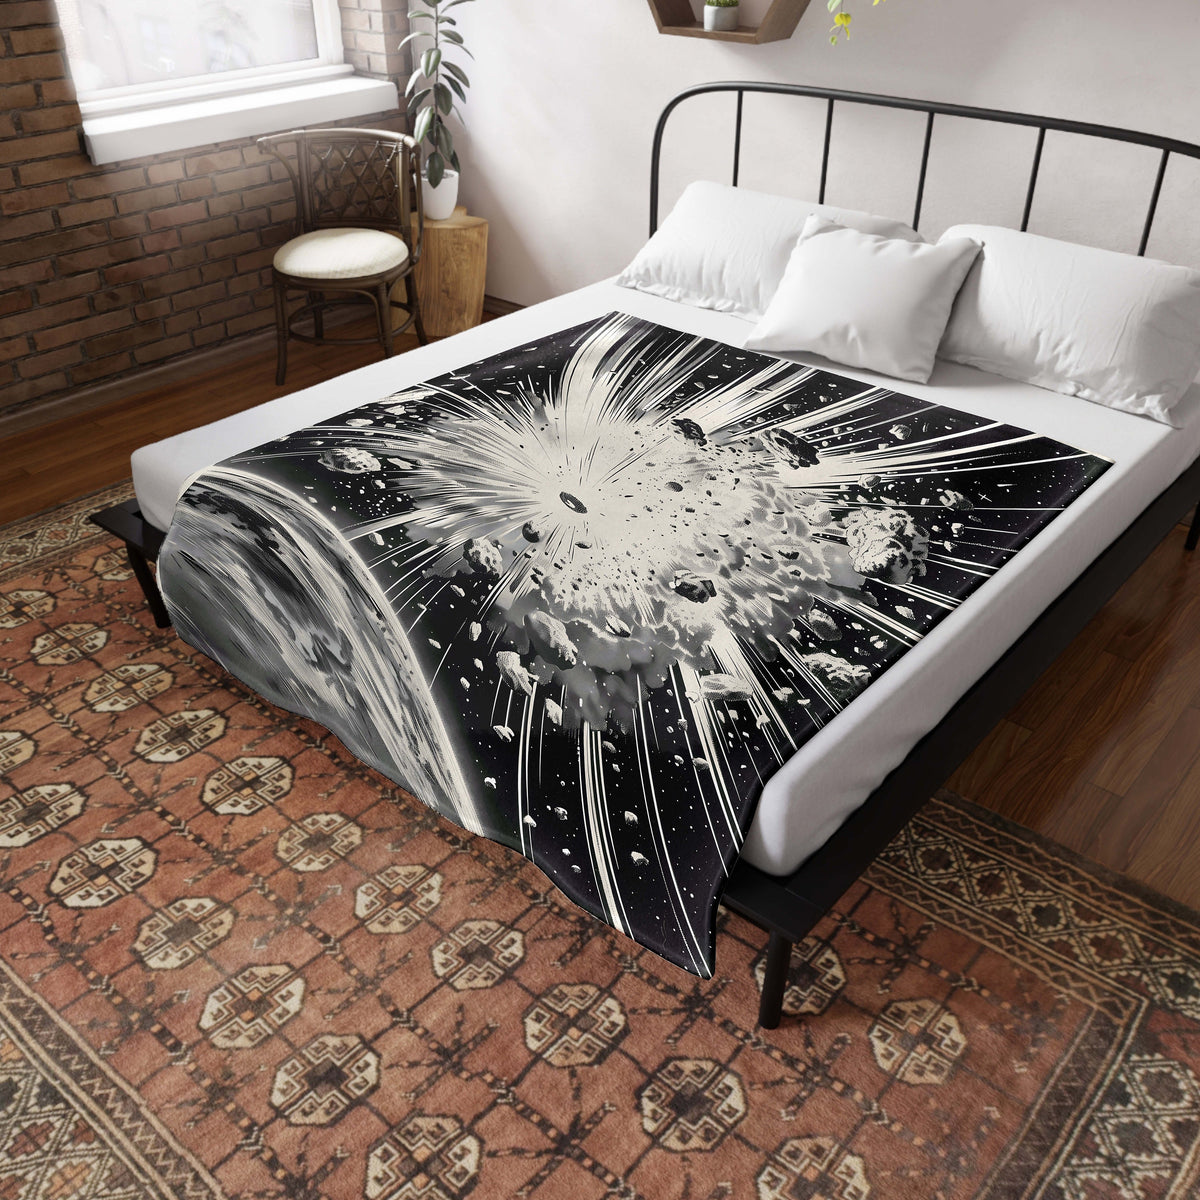 a bed with a black and white picture on it